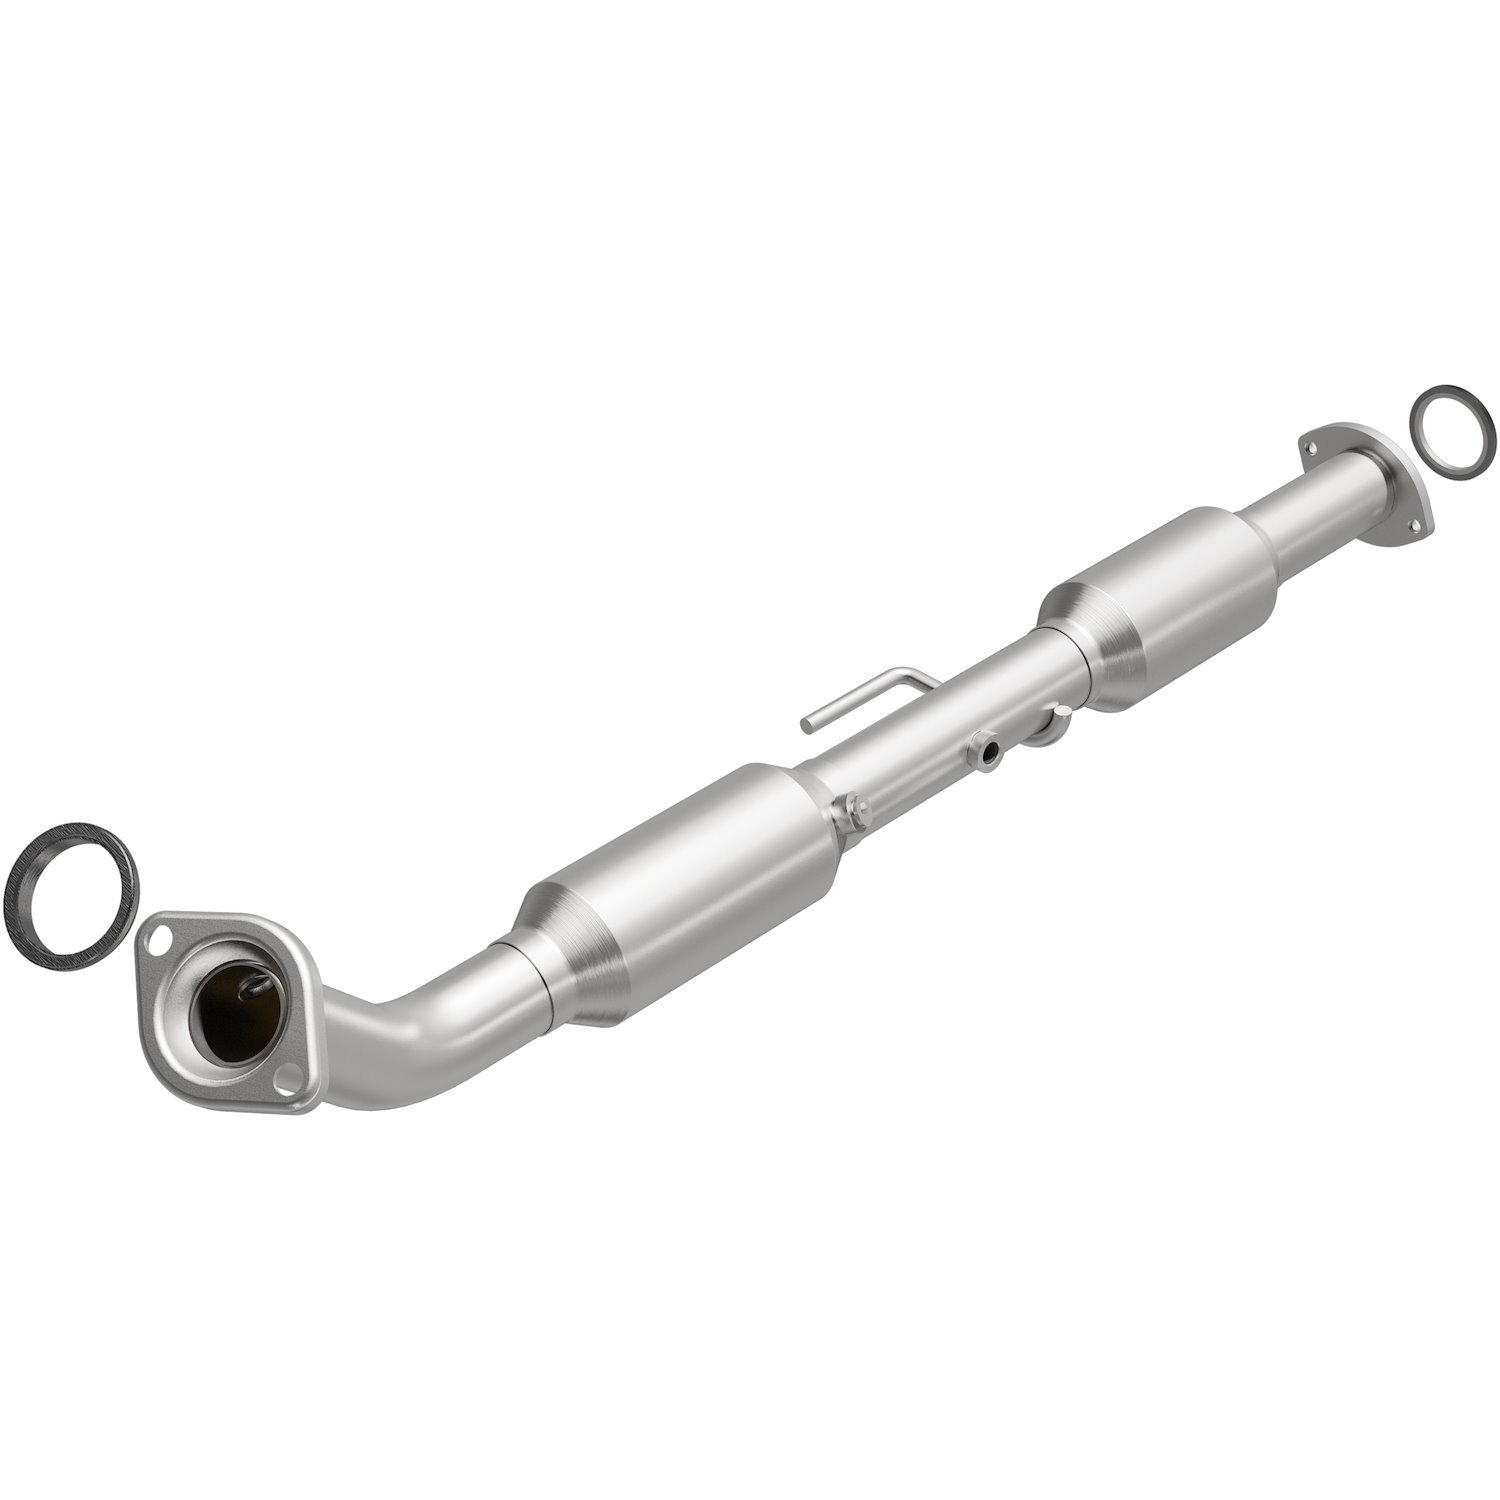 2005-2012 Toyota Tacoma California Grade CARB Compliant Direct-Fit Catalytic Converter